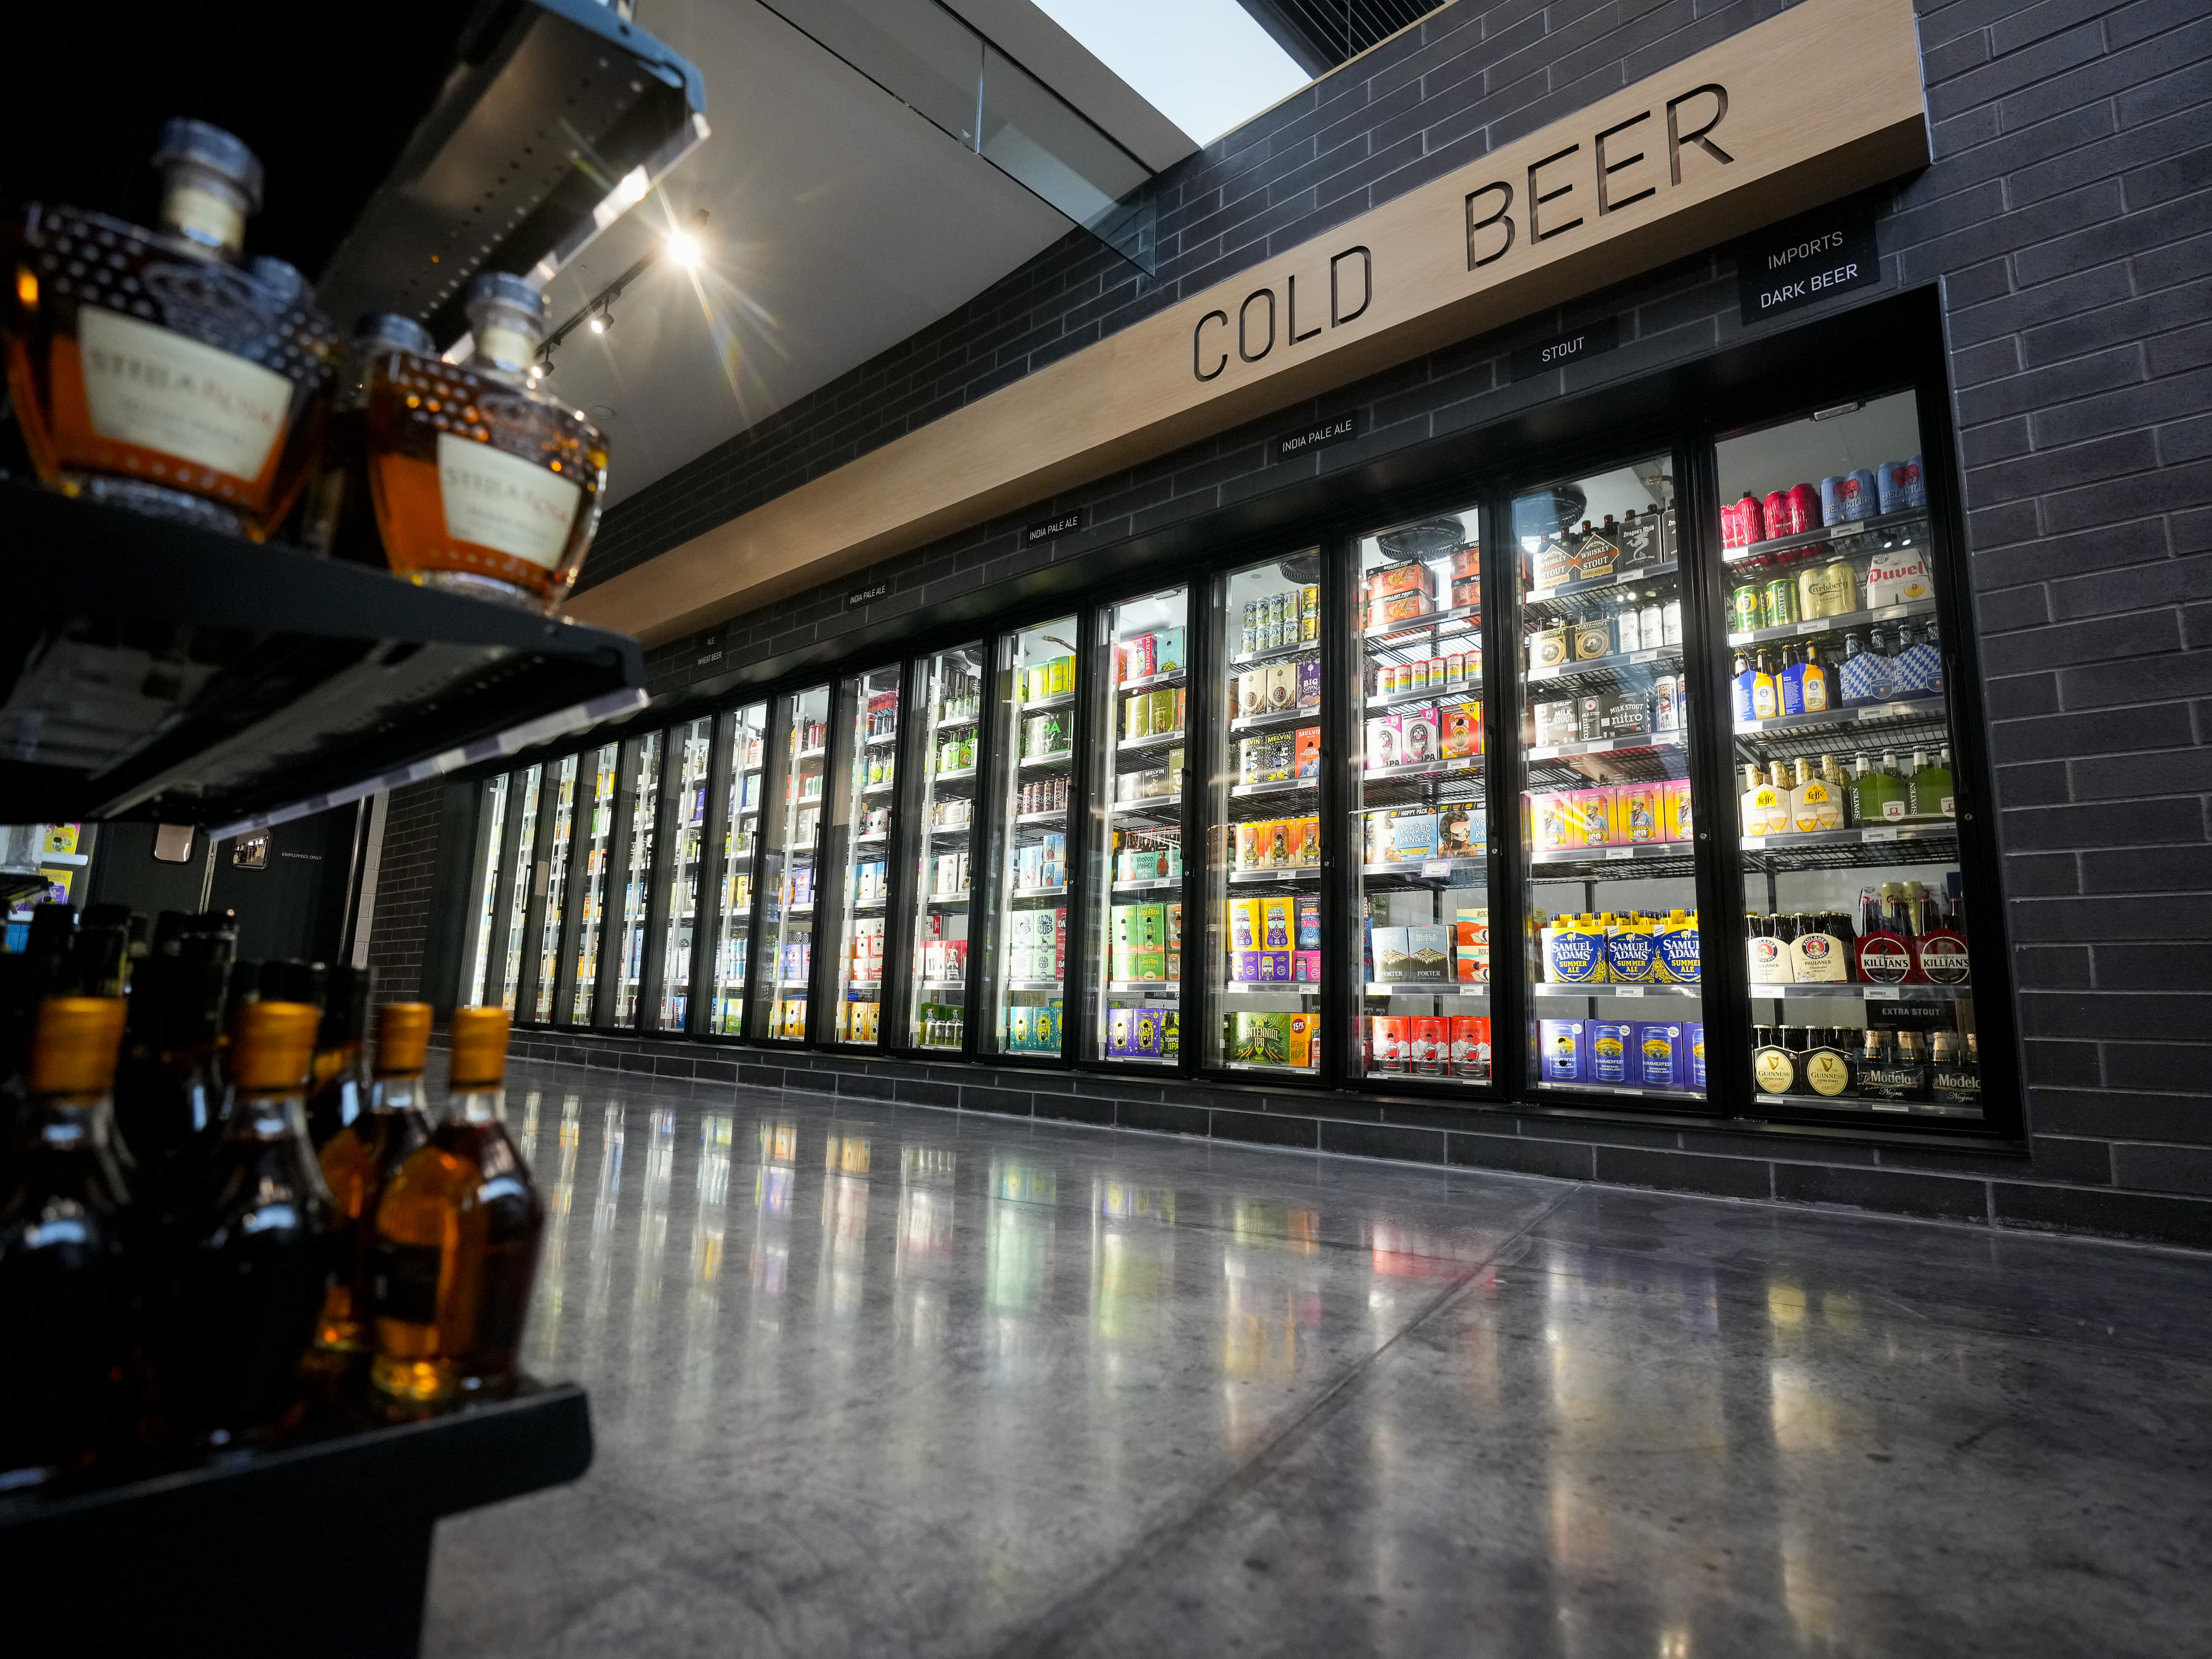 Opinion: Liquor store refrigerators boldly usher Salt Lake beer-lovers into the mid-20th century